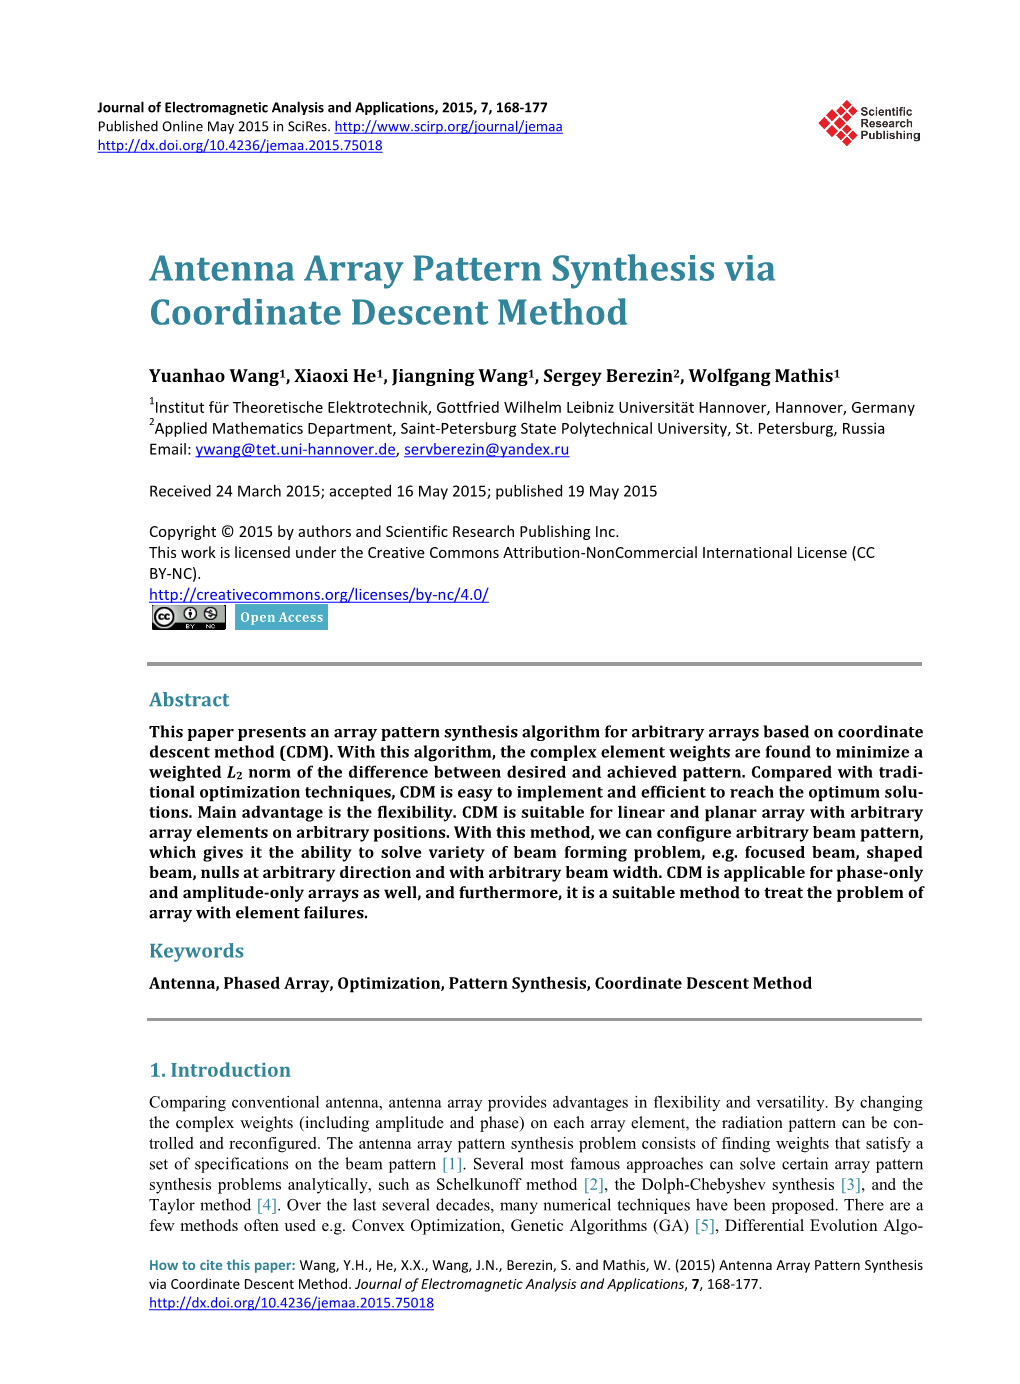 Antenna Array Pattern Synthesis Via Coordinate Descent Method